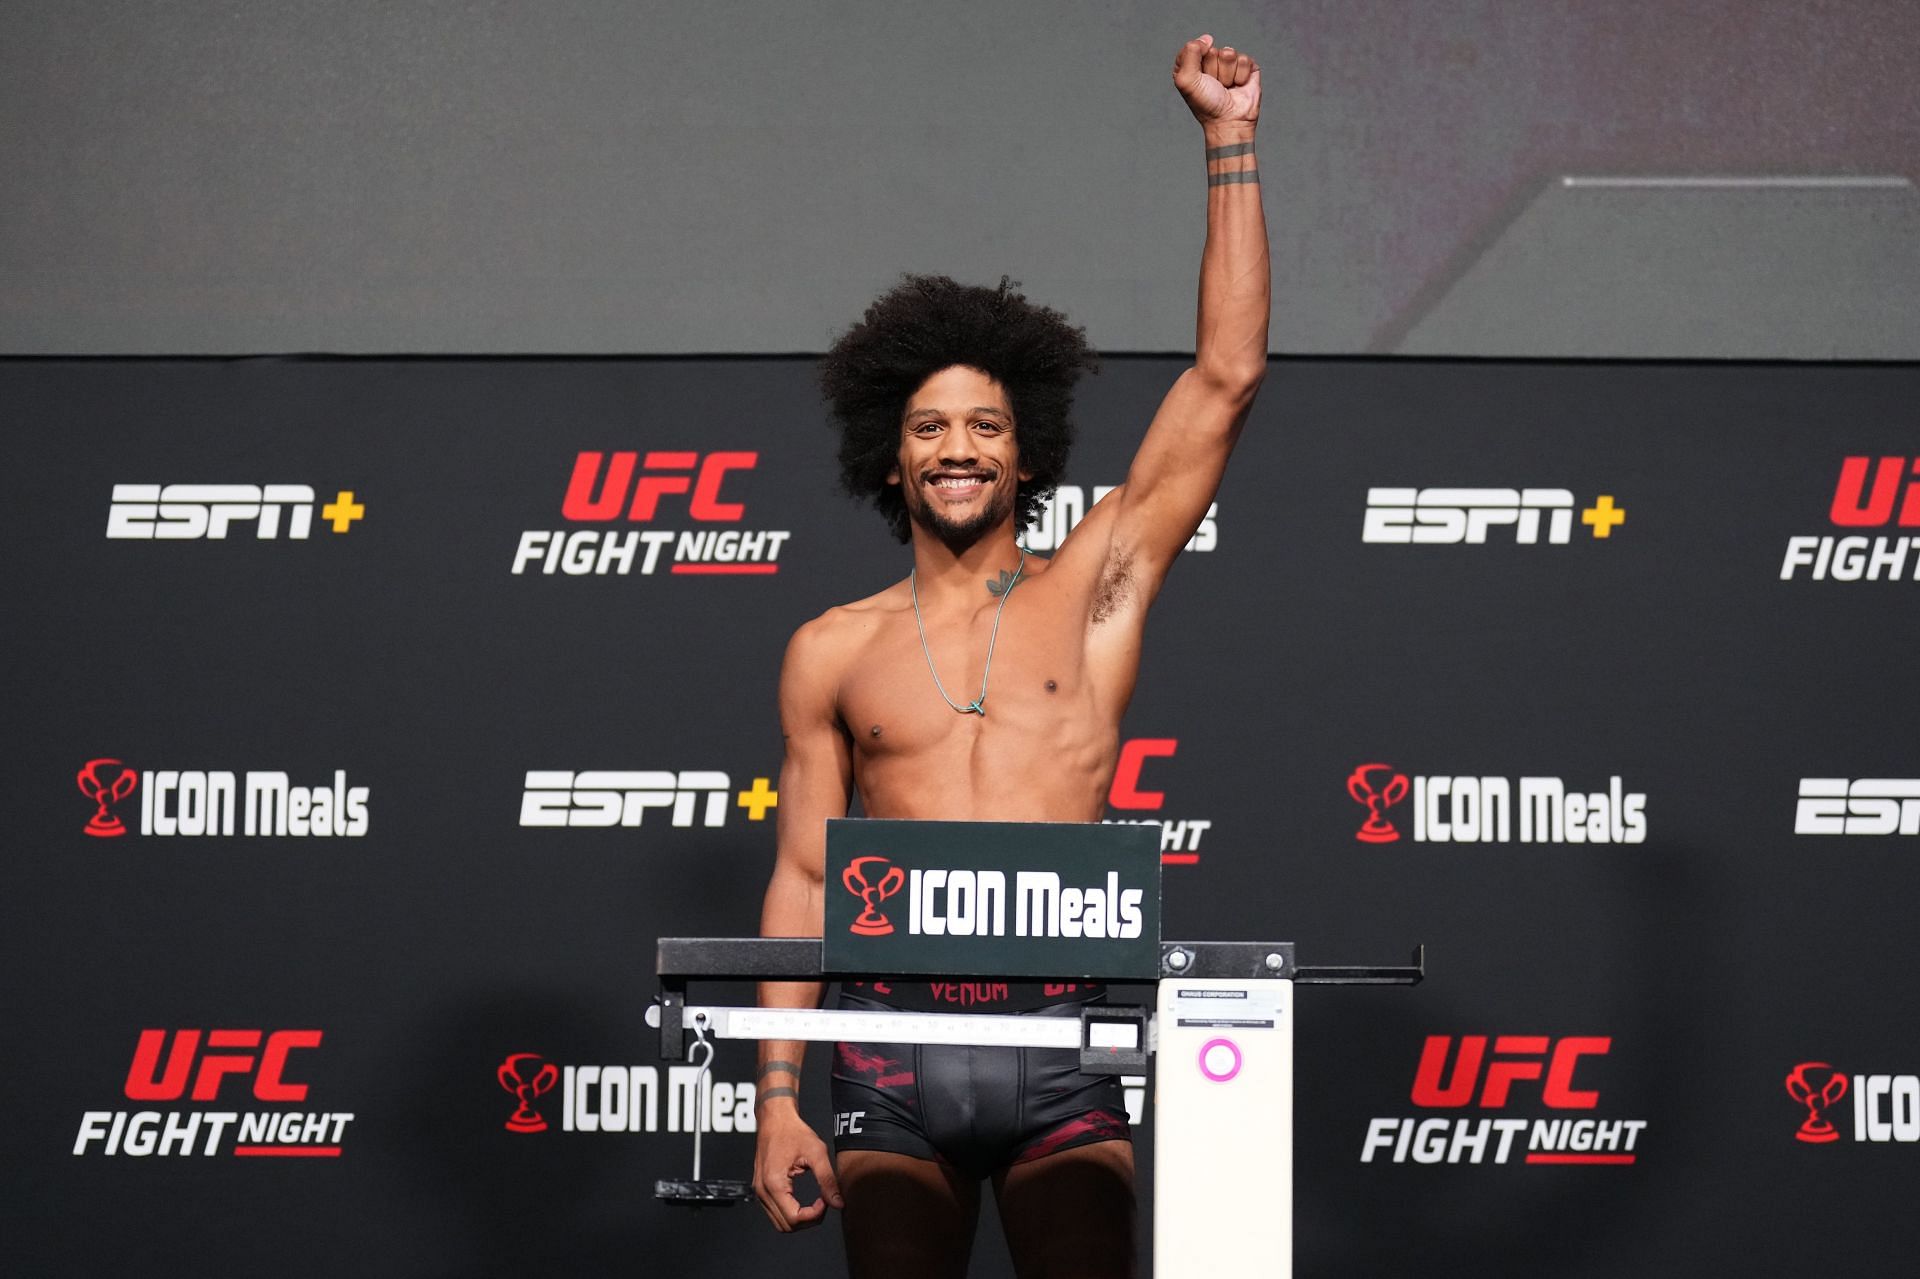 Alex Caceres claimed a $50k bonus for his efforts last night